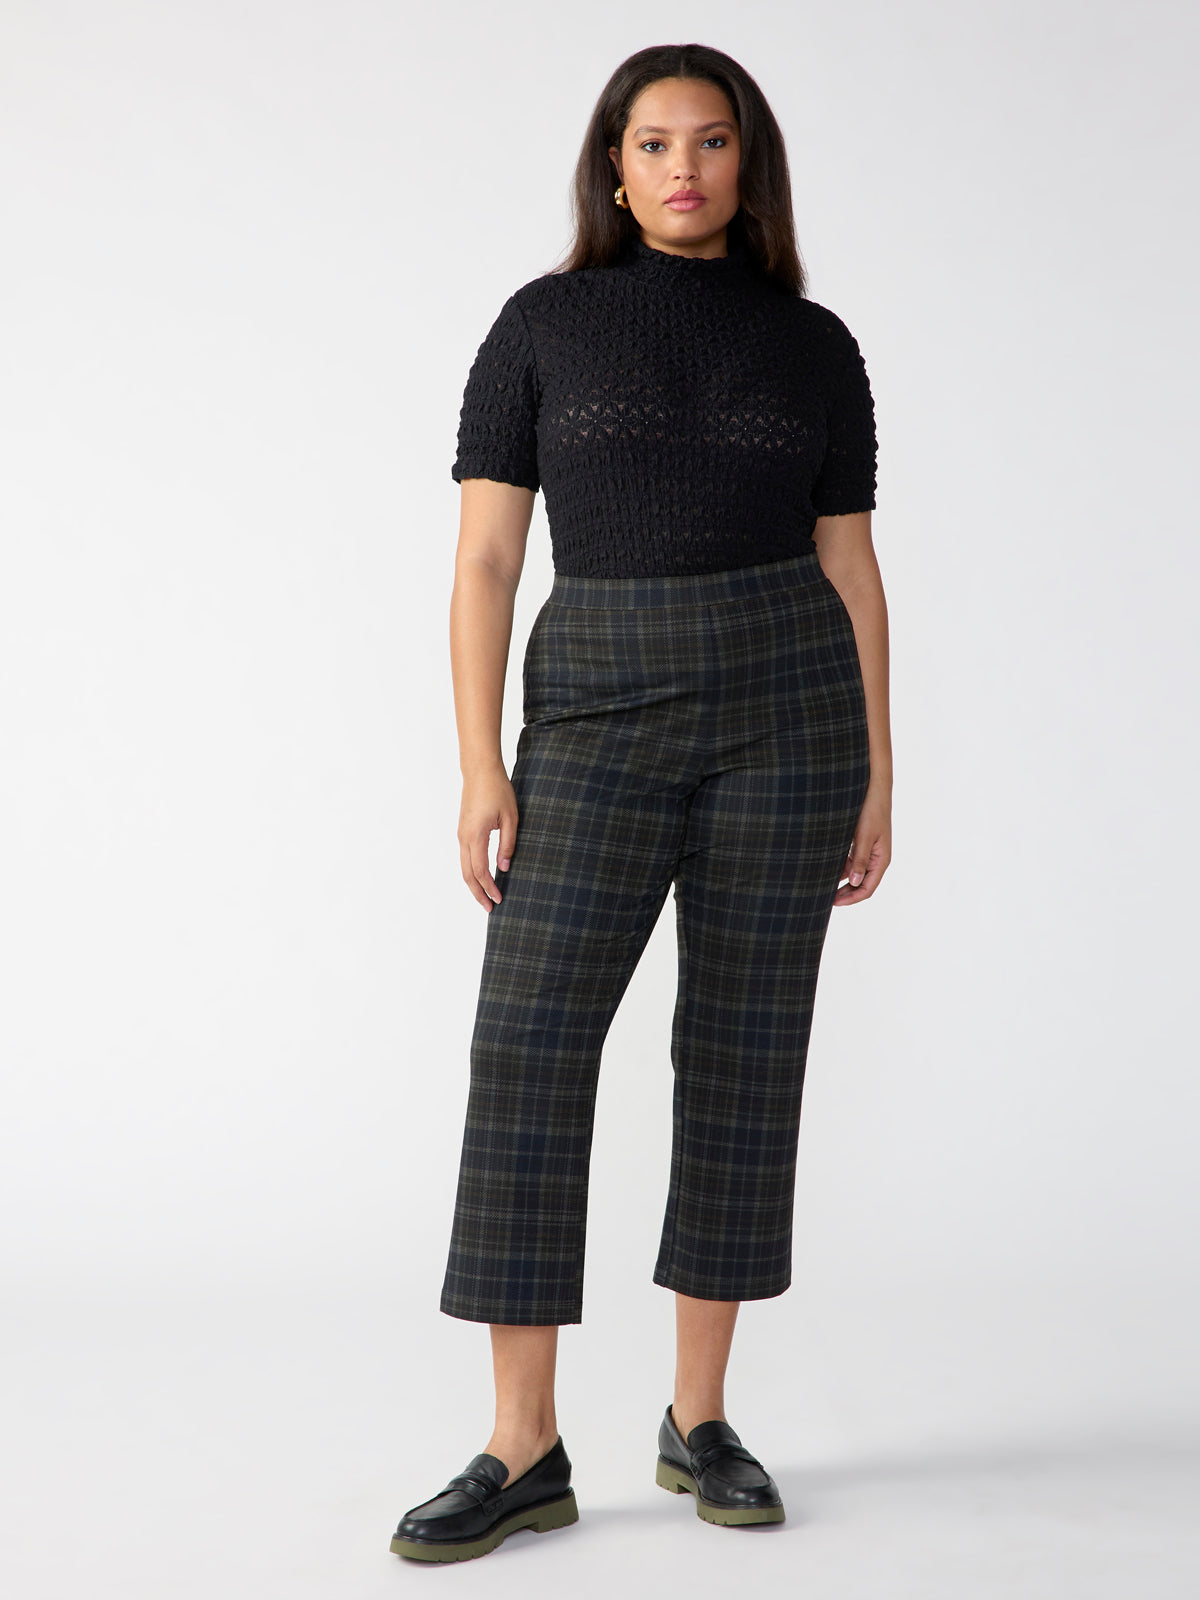 Carnaby Kick Crop Marion Plaid Inclusive Collection